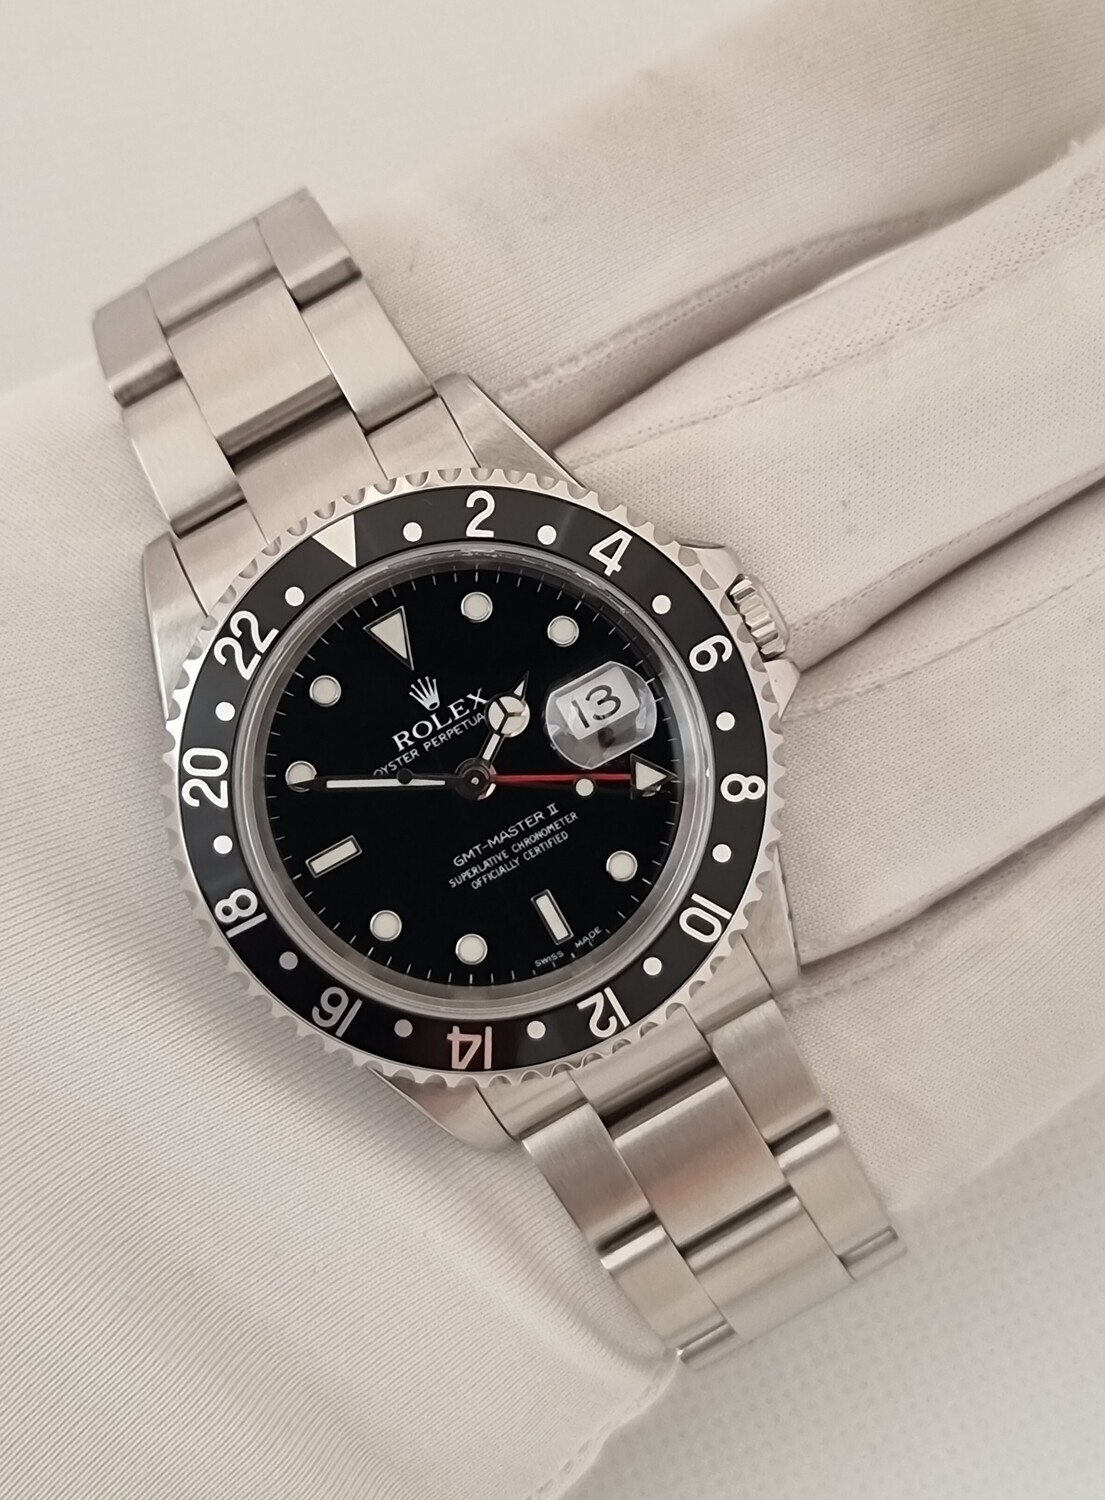 Rolex GMT Master II 16710, 2002, Complete with recent 2 year Rolex Service